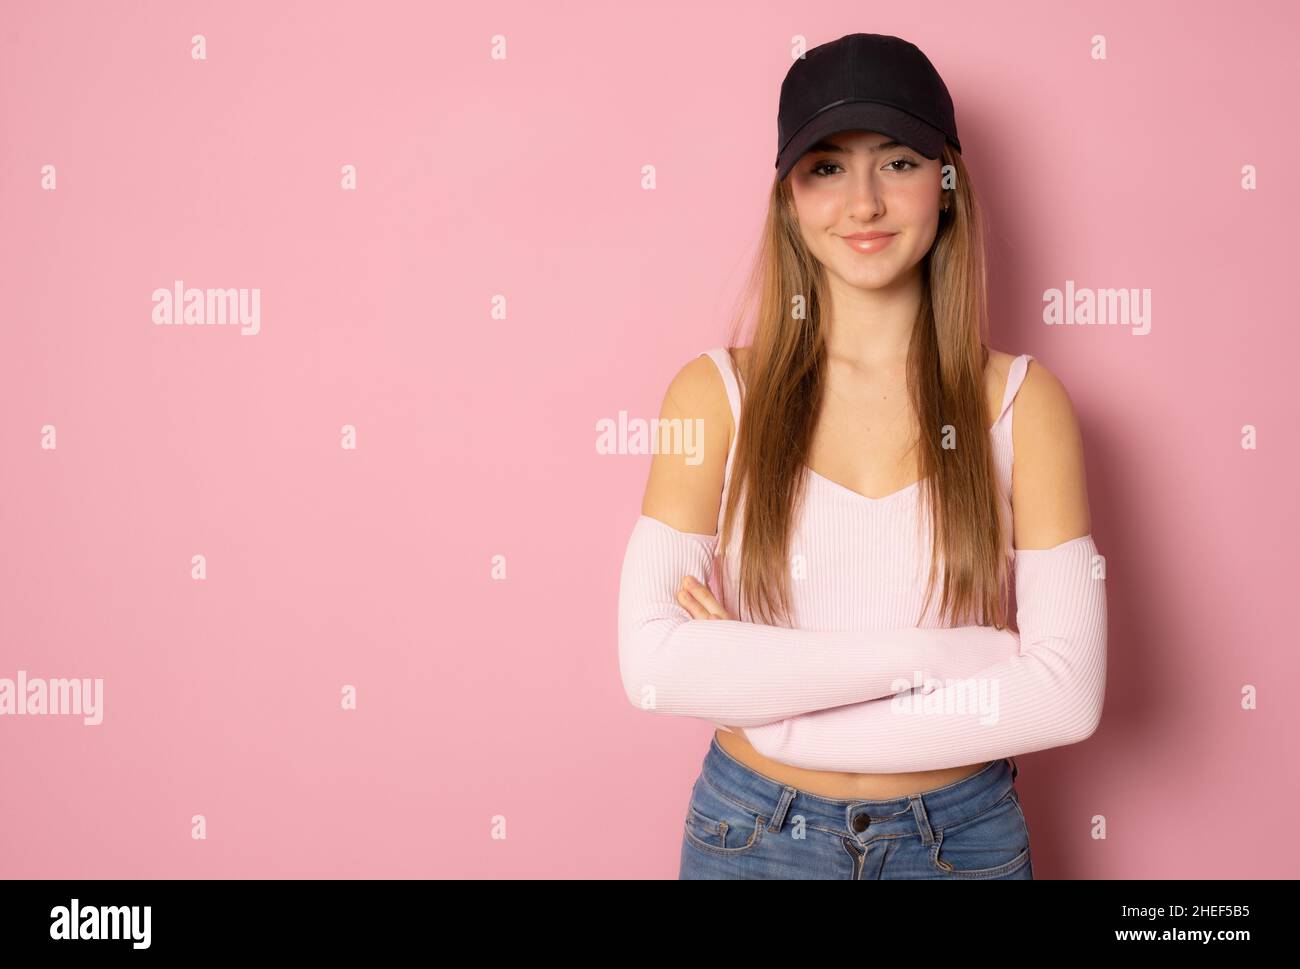 Beautiful girl wearing casual clothing and black cap posing with arms folded isolated over pink background. Stock Photo